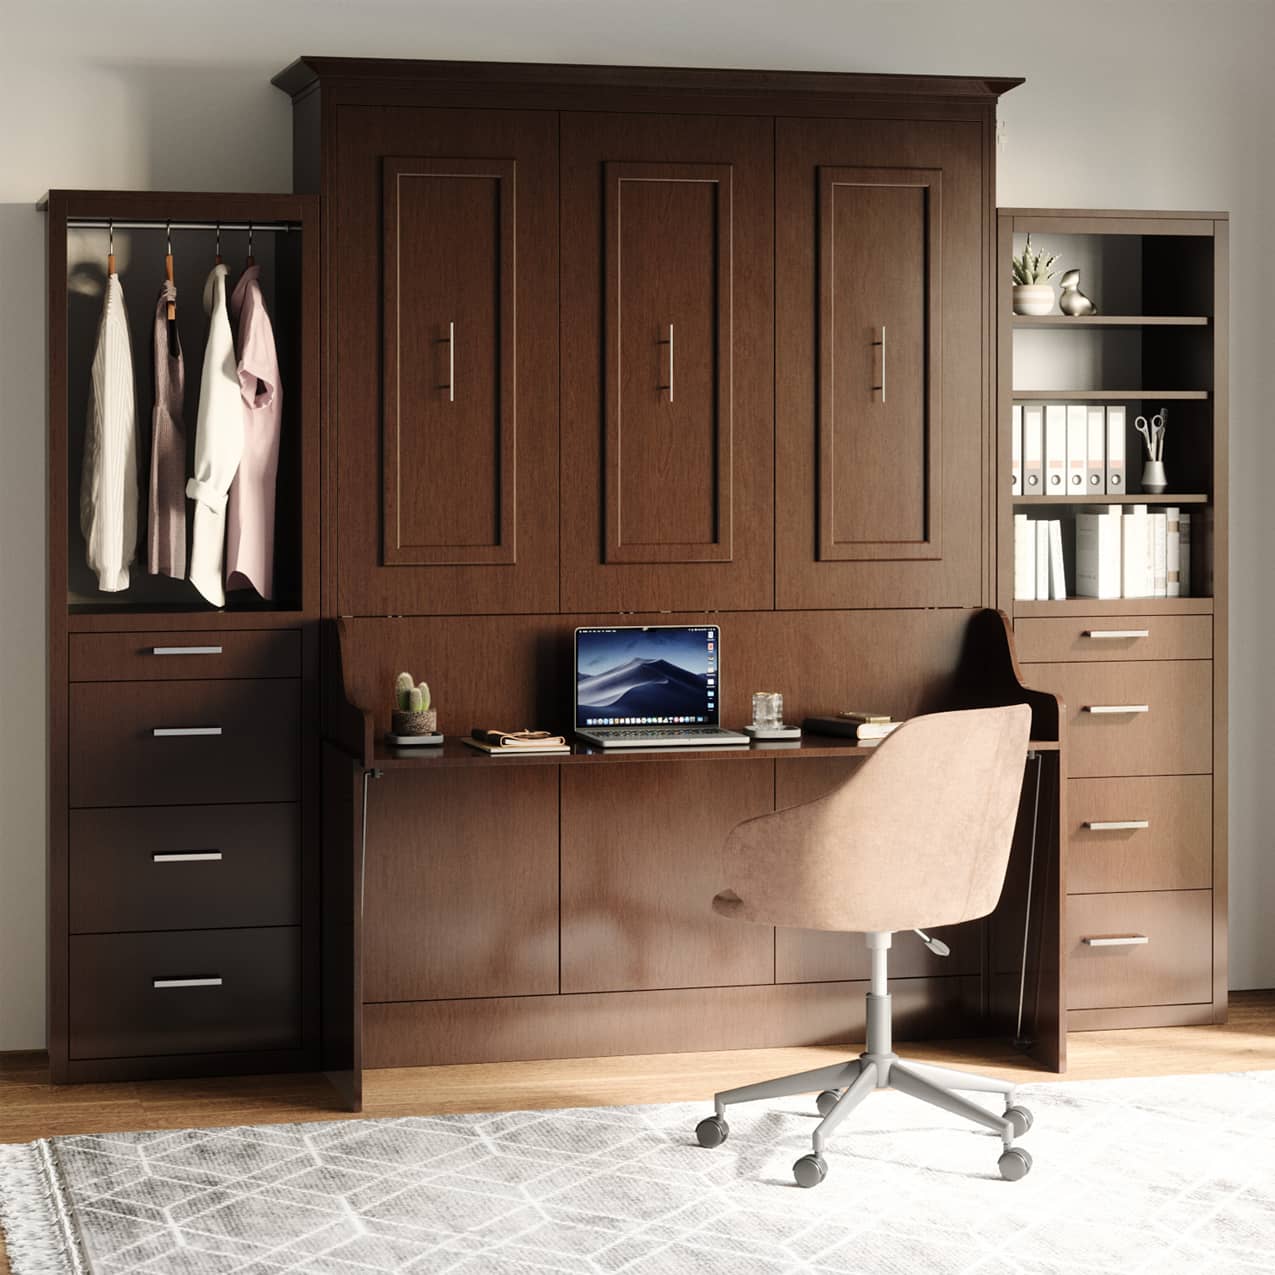 coventry queen murphy bed with desk and storage cabinets bed closed hidden hideaway hide away hide-a-way diy murphy bed kit fold out pull down wall bed cabinet desk bed combo home office guest bed adjustable shelves haning bar for clothes pullout nightstand drawers